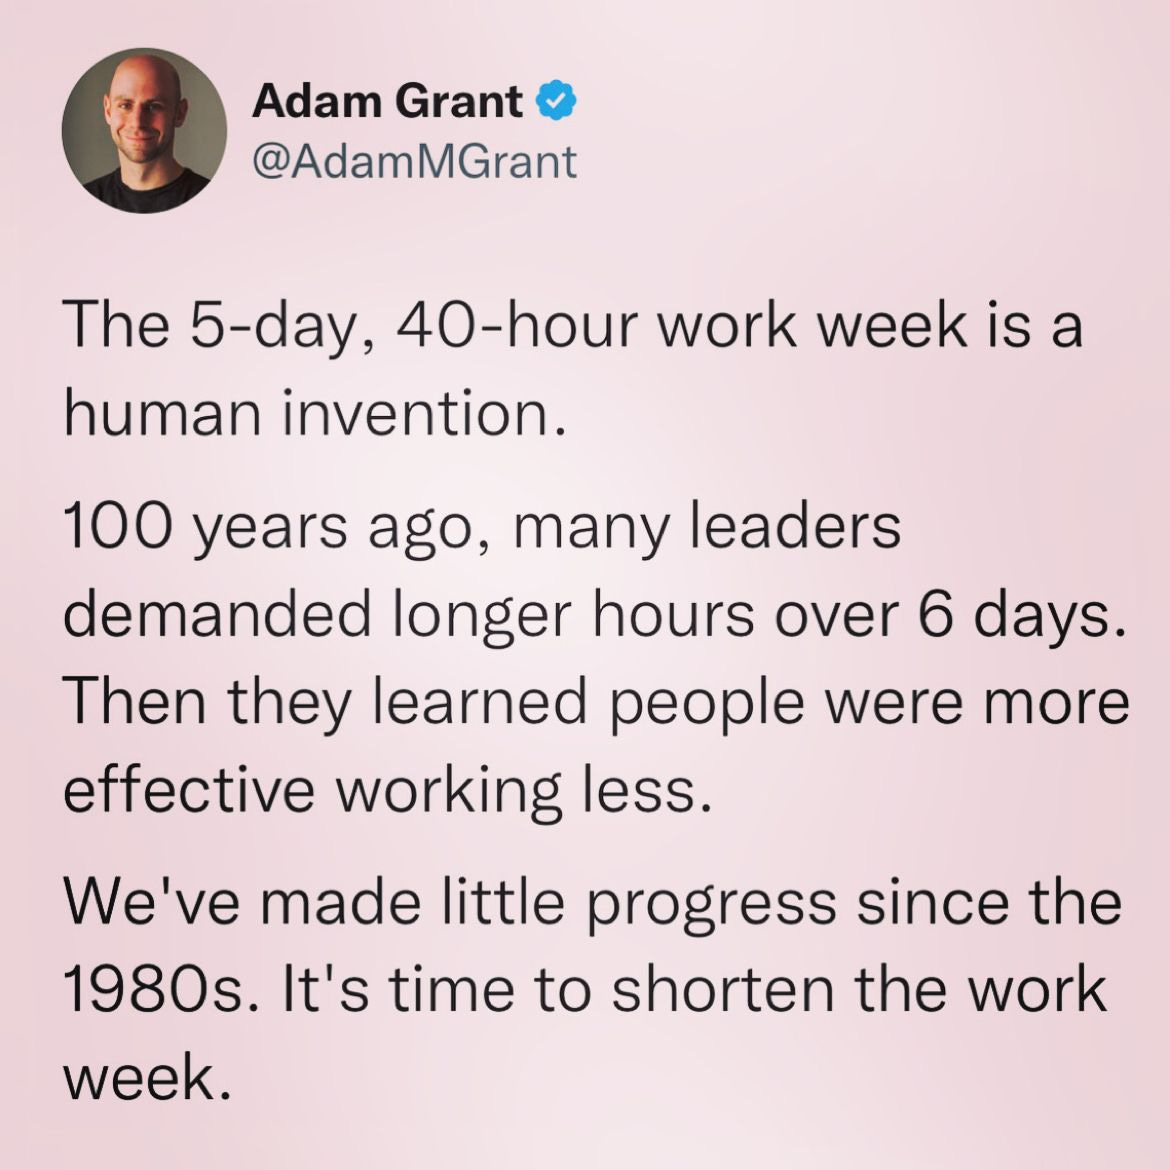 The 5-day, 40-hour work week is a human invention.

100 years ago, many leaders demanded longer hours over 6 days. Then they learned people were more effective working less.

We've made little progress since the 1980s. It's time to shorten the work week. 